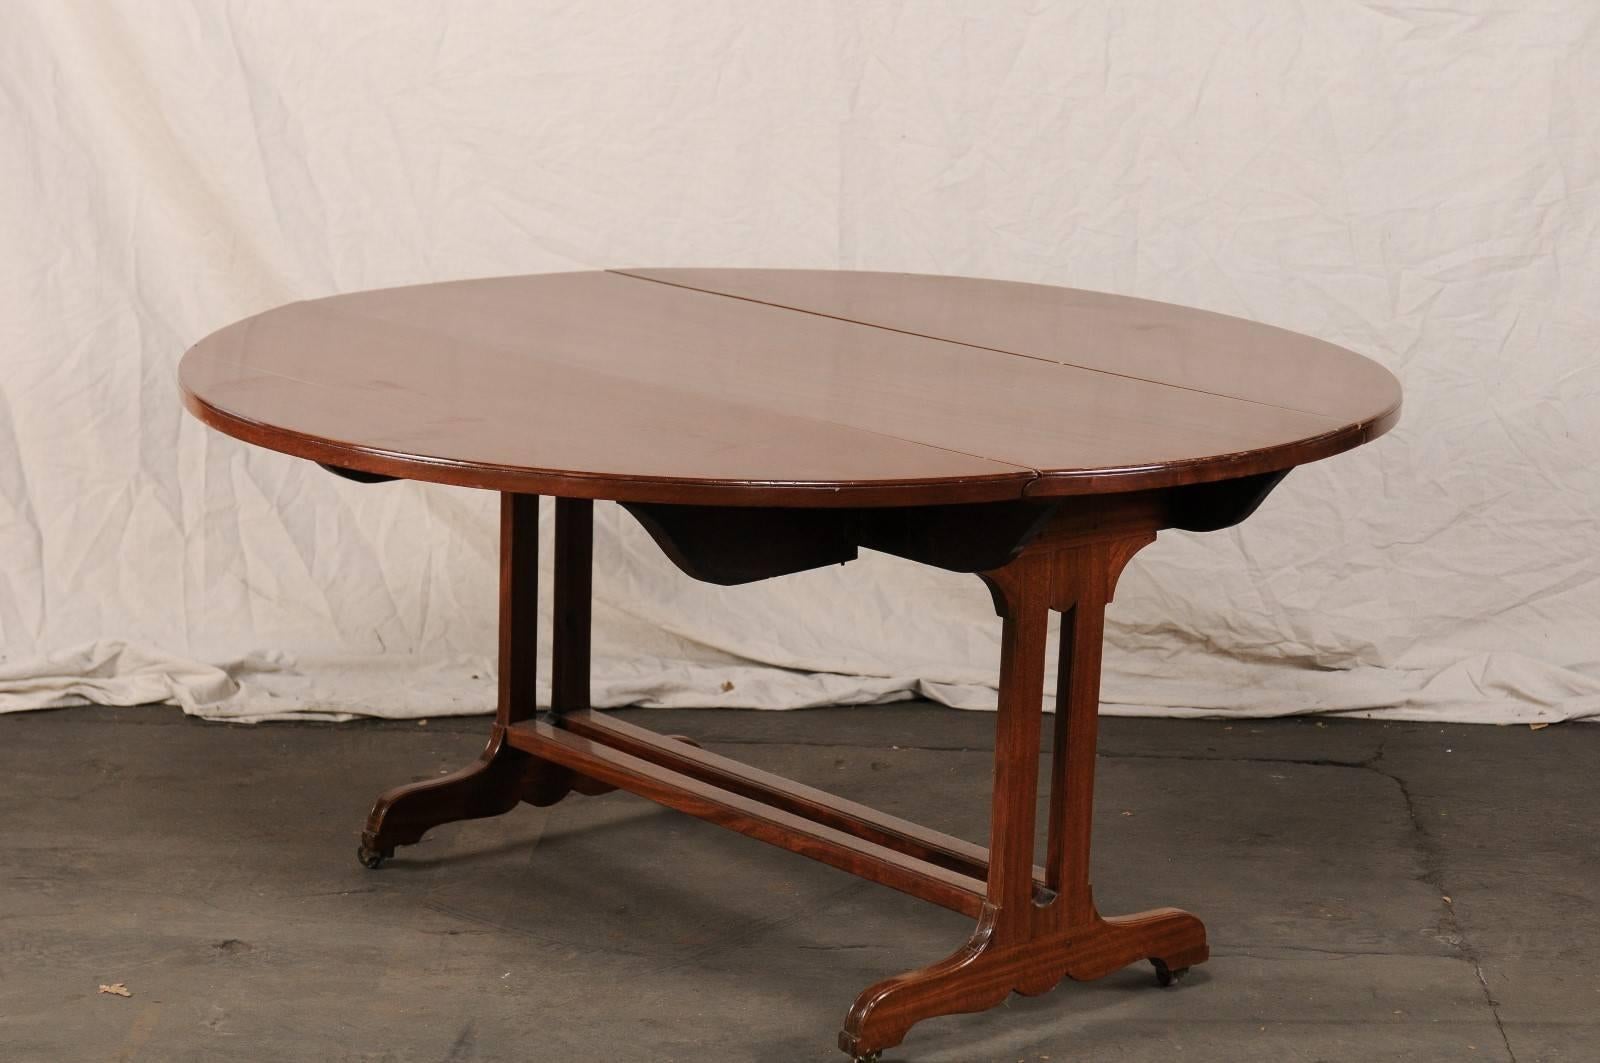 Wood Late 19th Century Drop-Leaf Table, Trestle Form Base with Casters For Sale